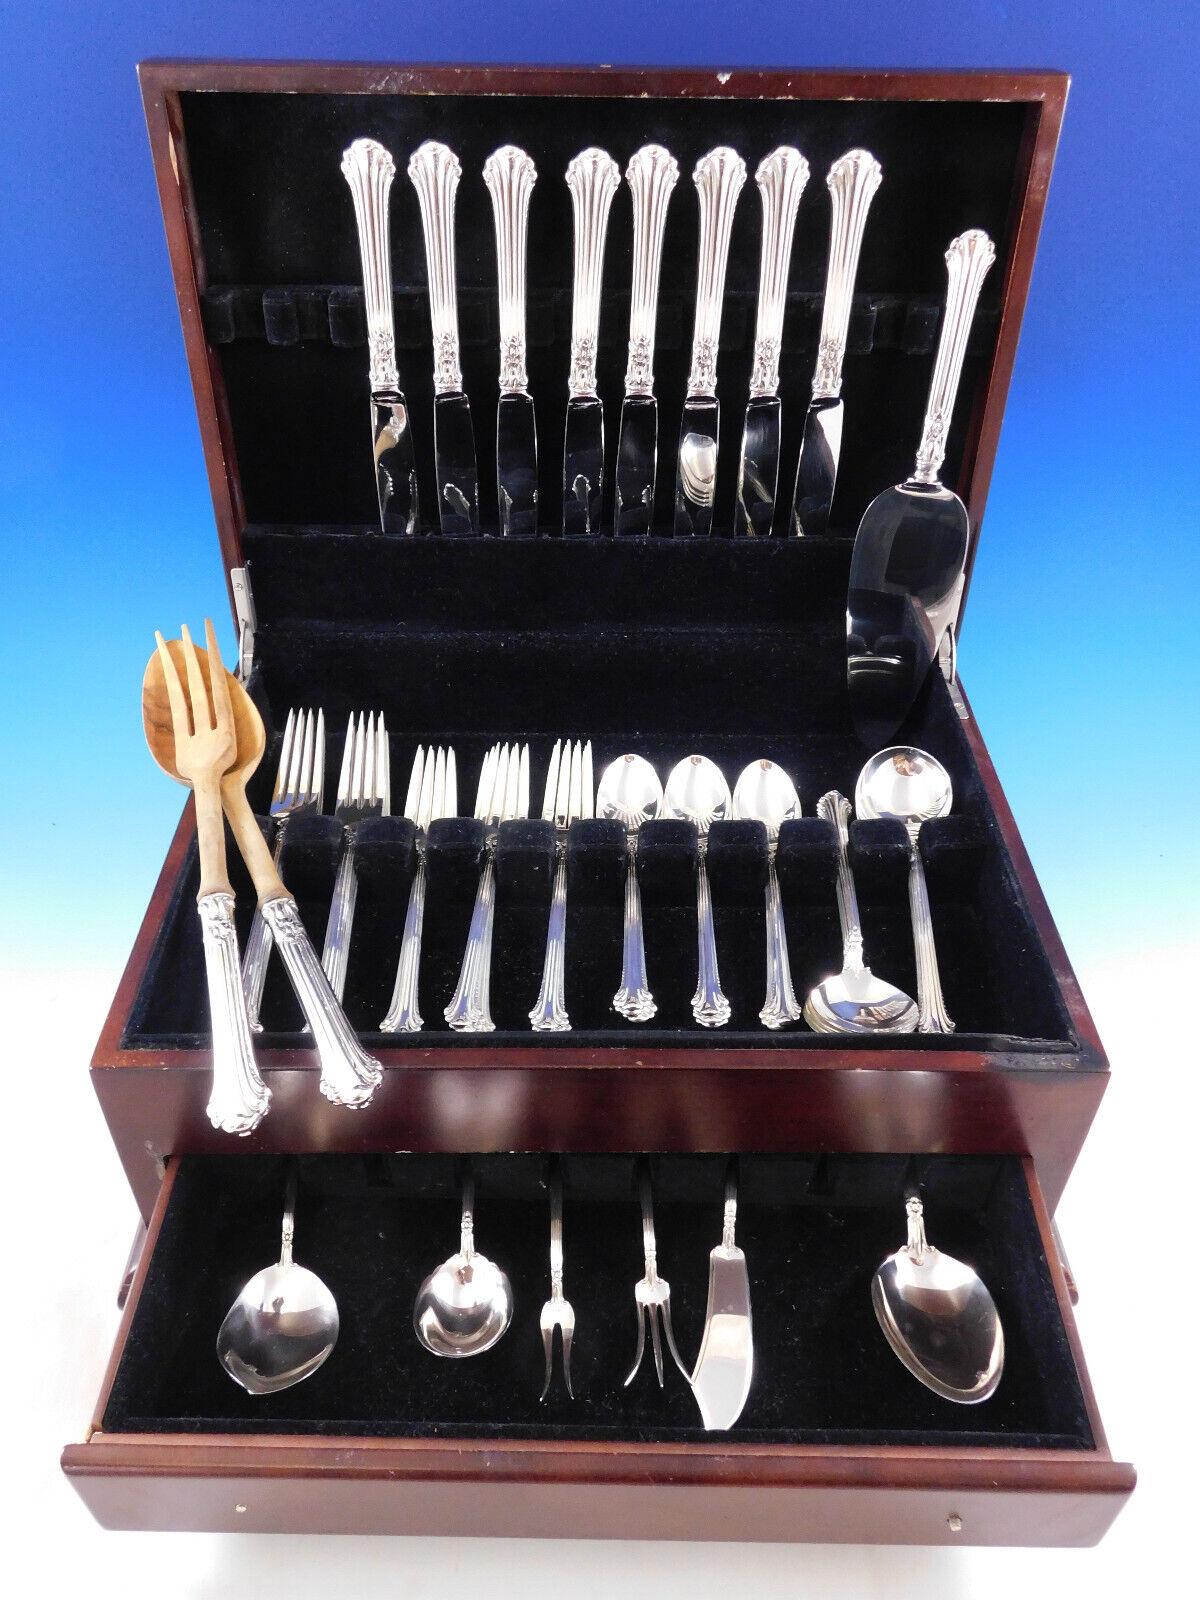 Dinner Size Silver Plumes by Towle sterling silver Flatware set, 49 pieces. This set includes:

8 Dinner Size Knives, 9 1/2